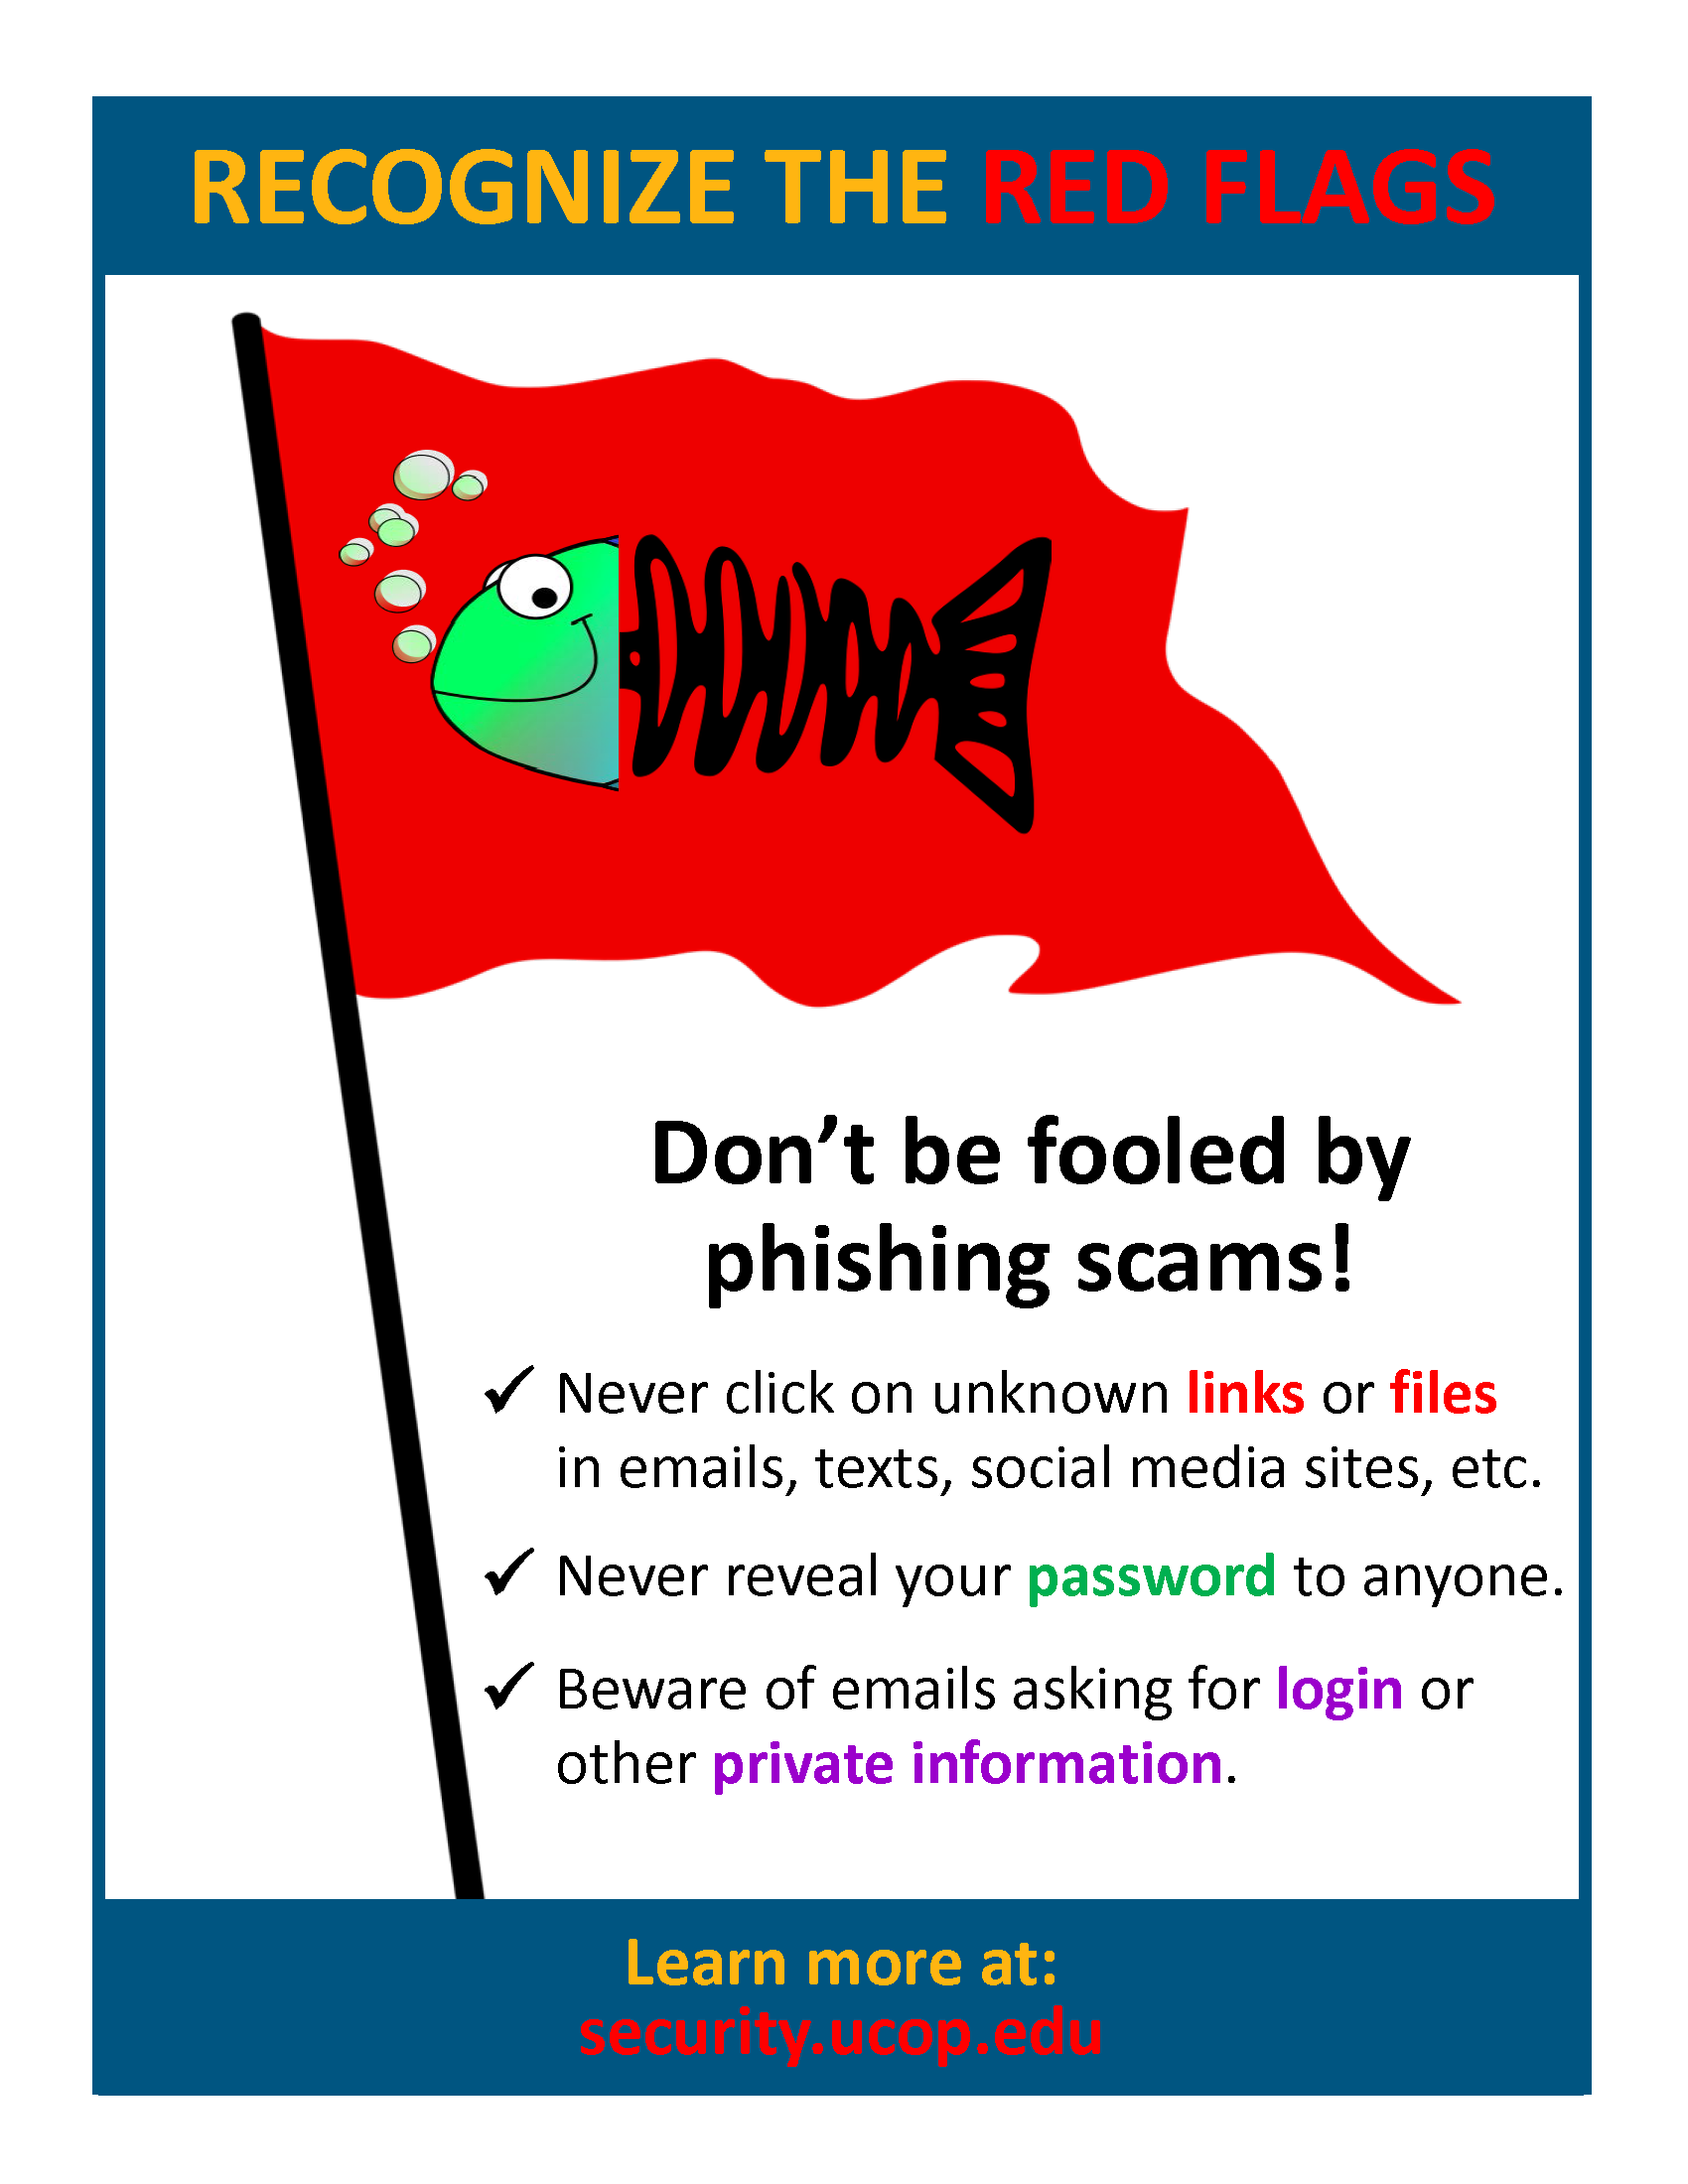 Poster: Know the red flags for phishing. Never click on unknown links or attachments. Never reveal your password. Beware of email asking for login or other private information.